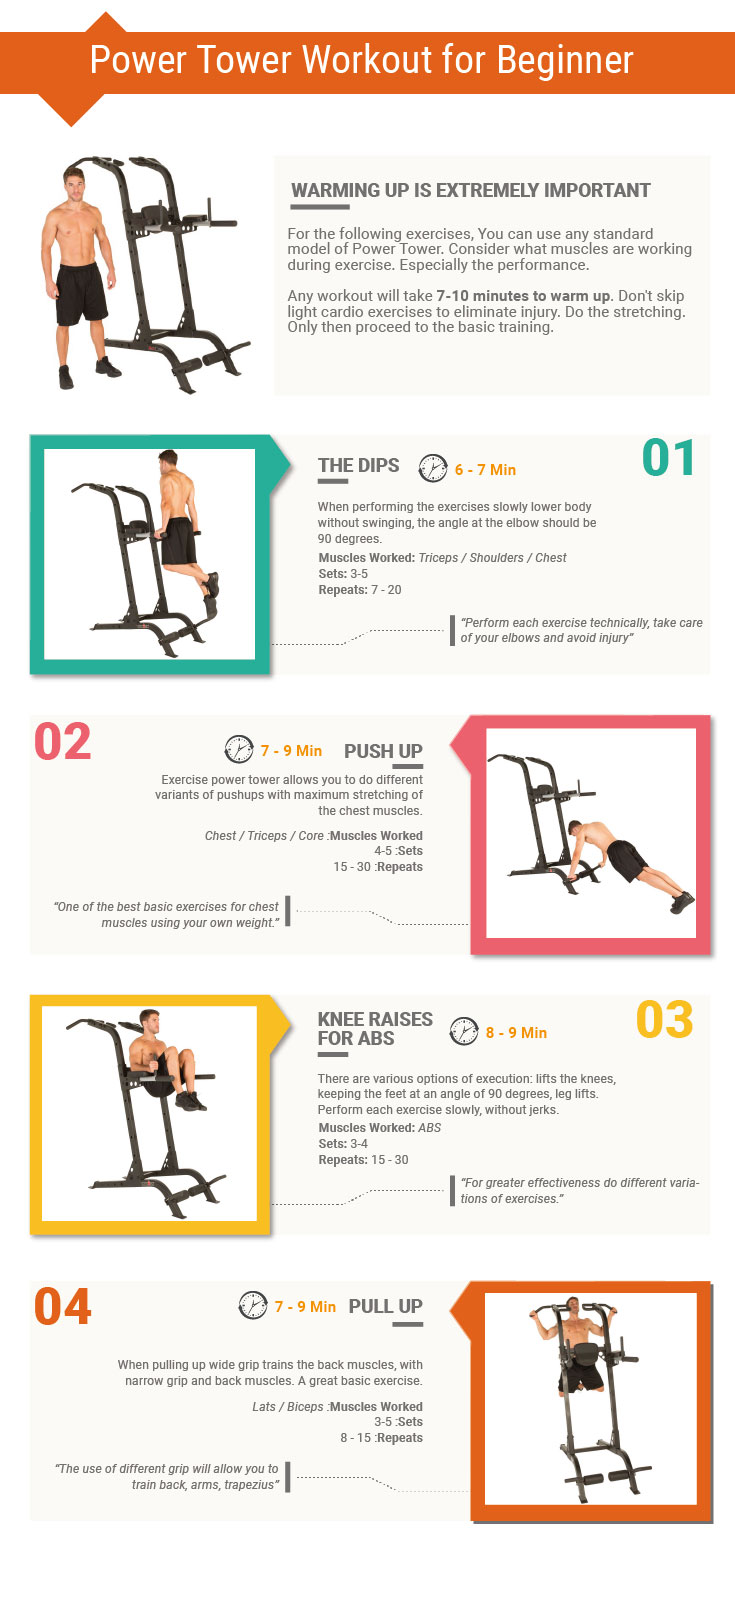 Power Tower Workout for Beginner